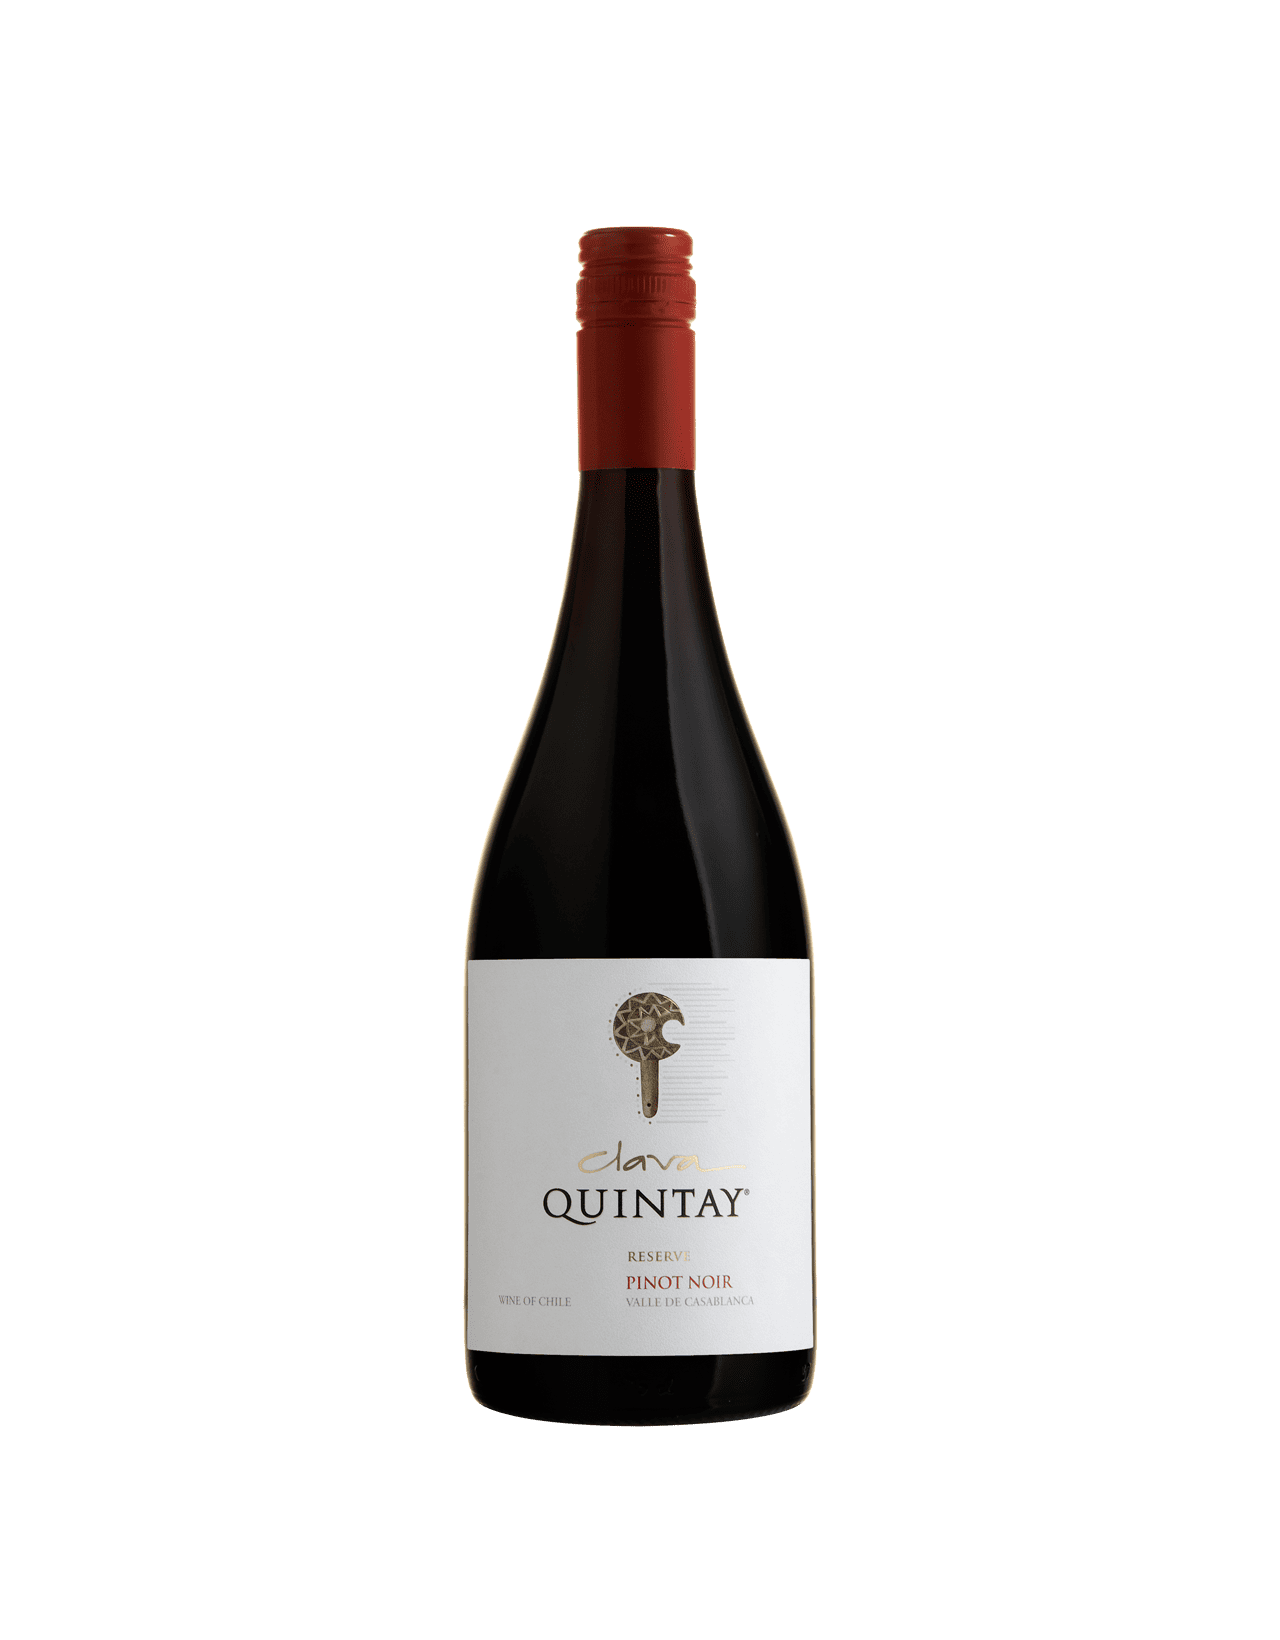 Bottle of Clava Quintay Pinot Noir from search results